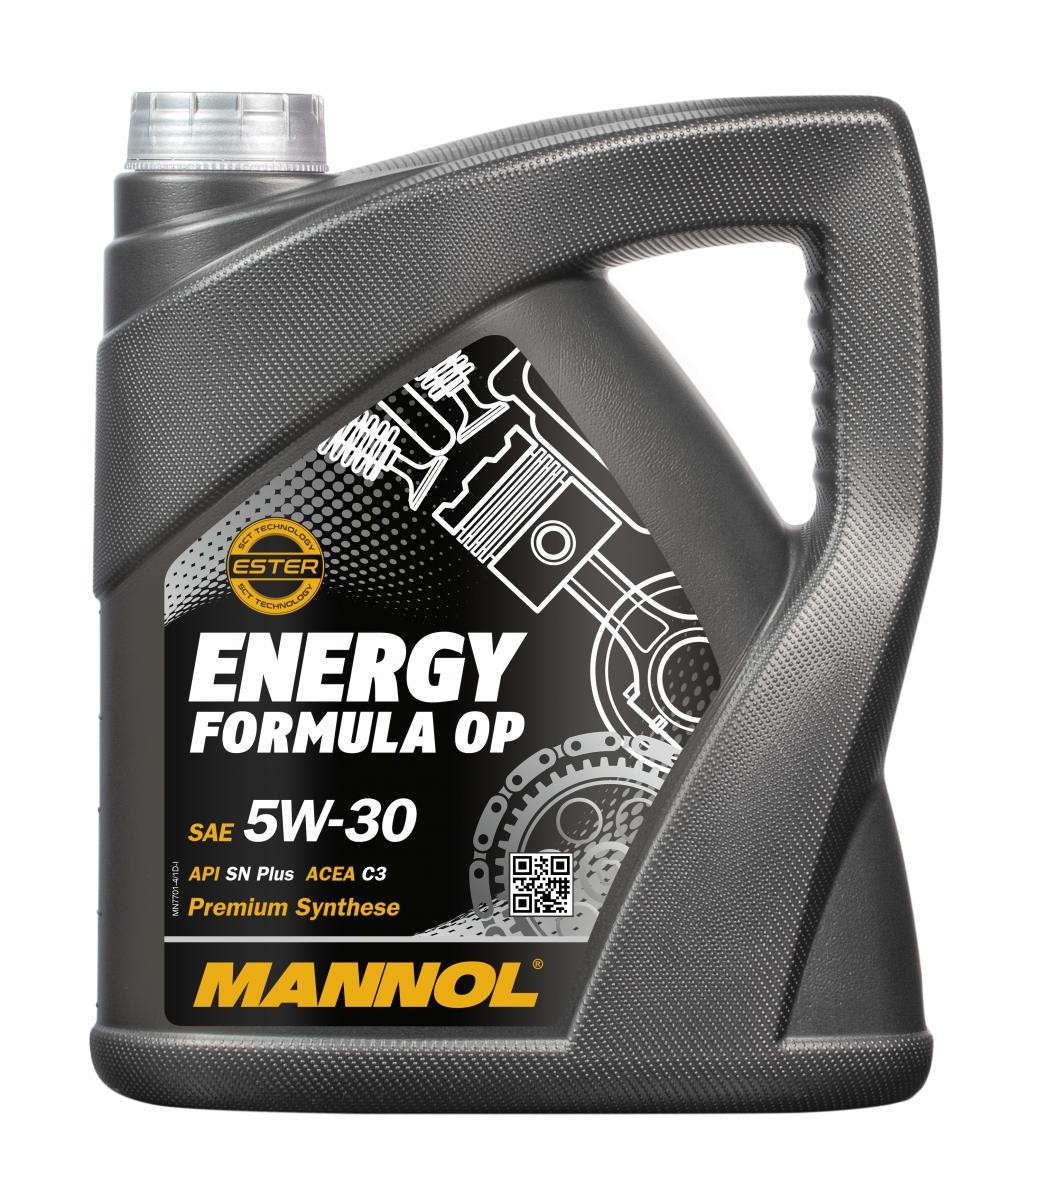 Engine oil MN7701-4 MANNOL O.E.M. 7701 5W-30, 4l, Synthetic Oil